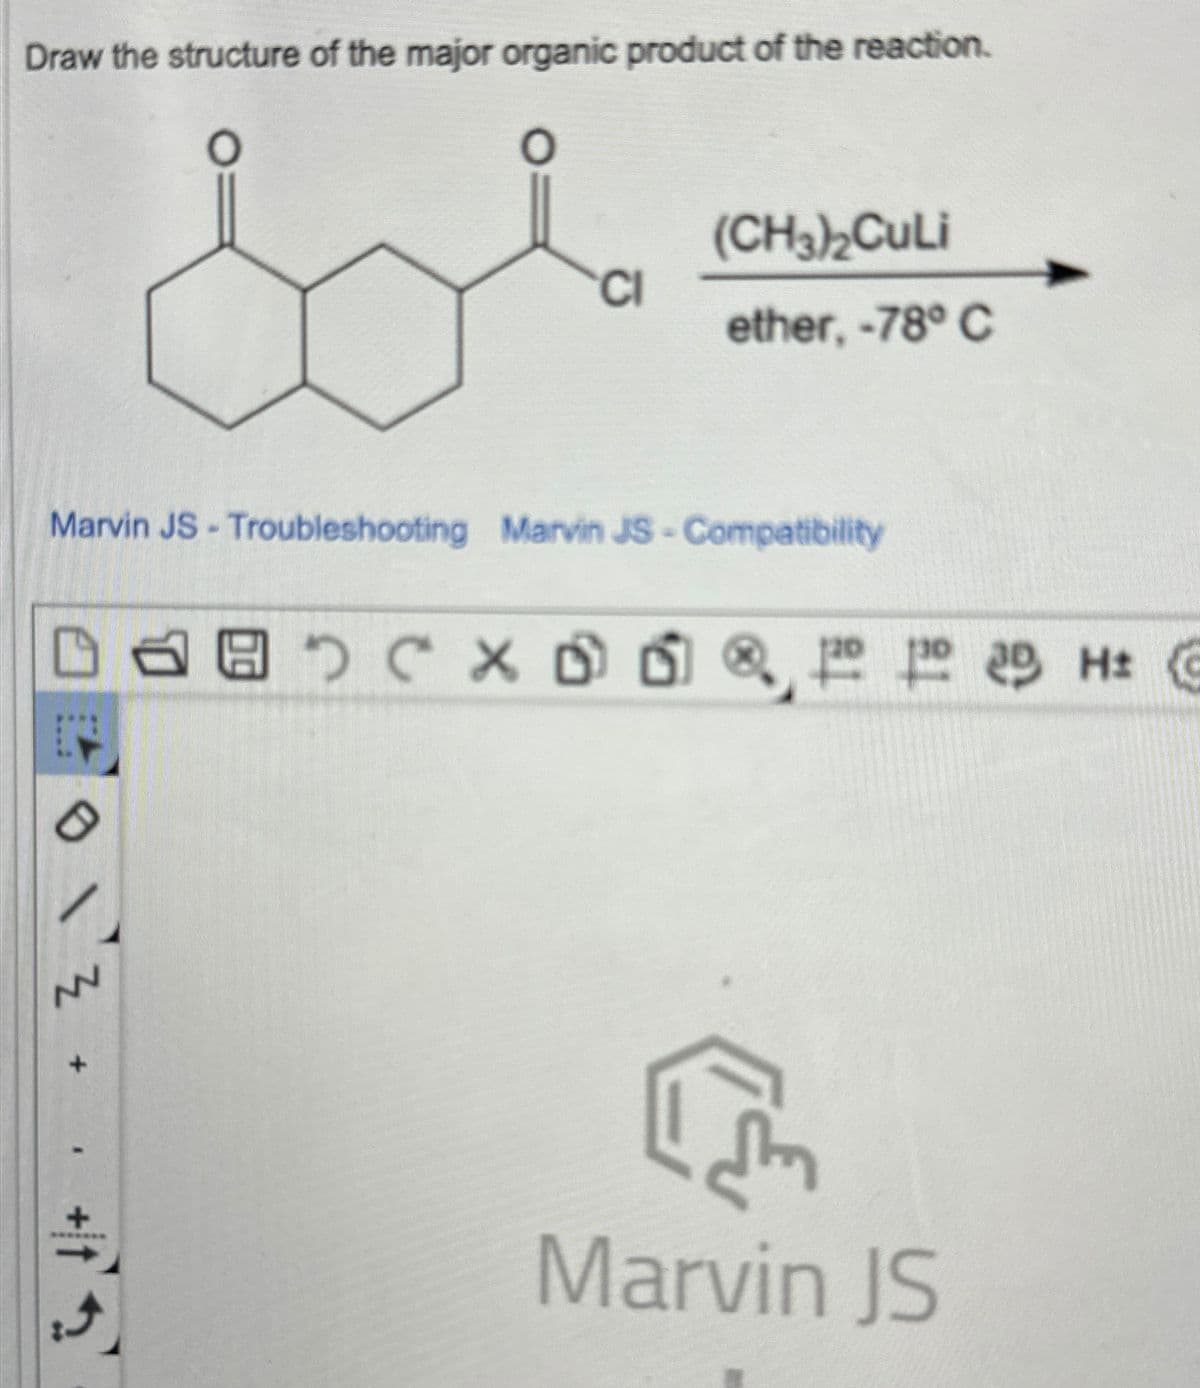 Draw the structure of the major organic product of the reaction.
CI
(CH3)2₂CuLi
ether, -78° C
Marvin JS- Troubleshooting Marvin JS- Compatibility
로
+
+
Marvin JS